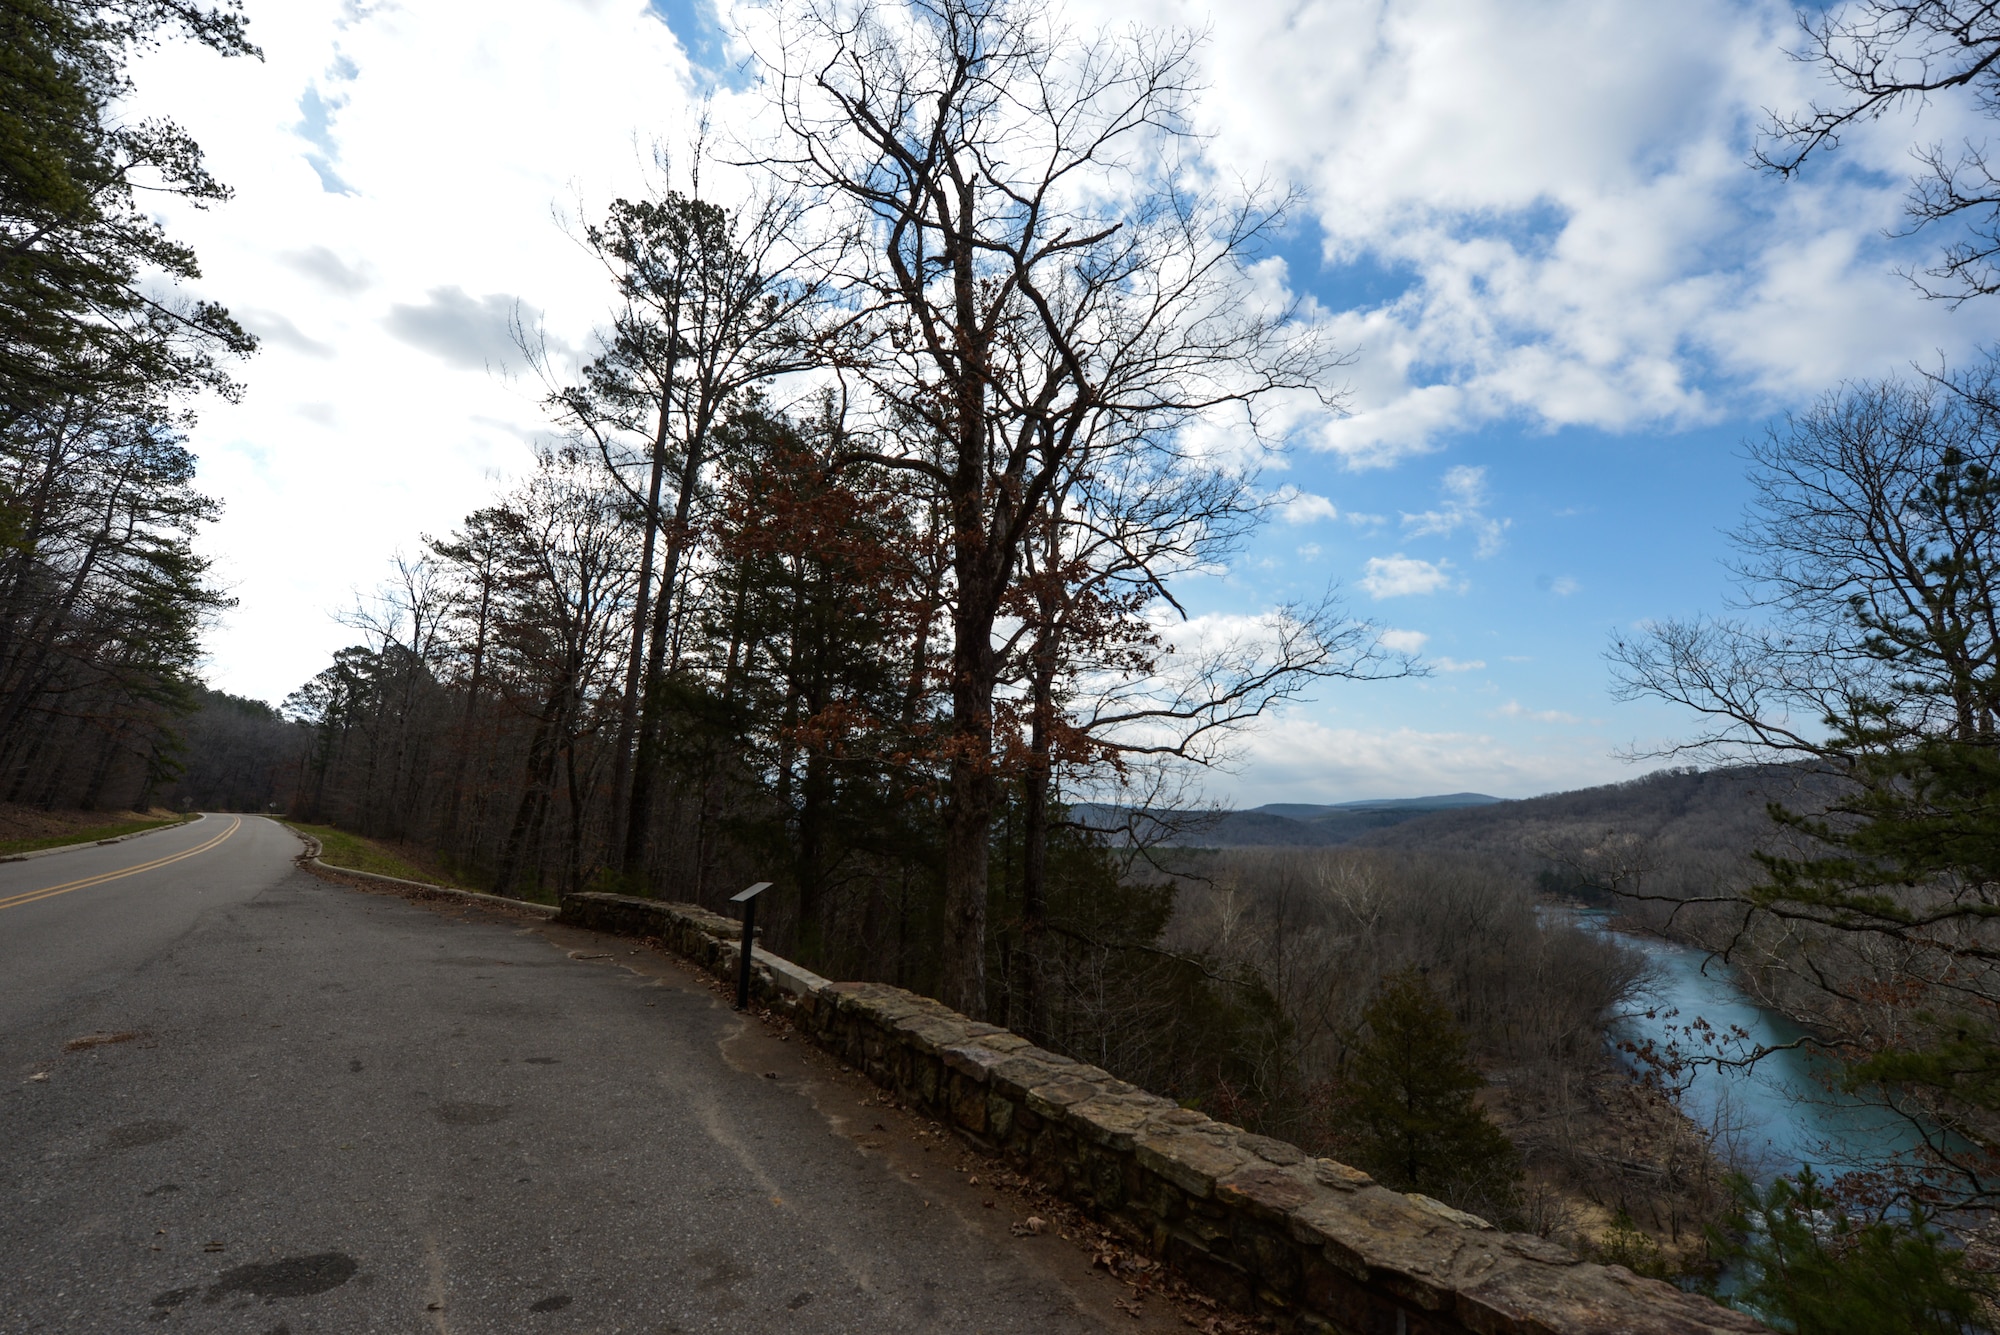 The Ozark National Forest offers winding roads and breathtaking vistas. Arkansas Highway 215 is one of many roads in the region that follow both mountainous terrain and flowing streams.